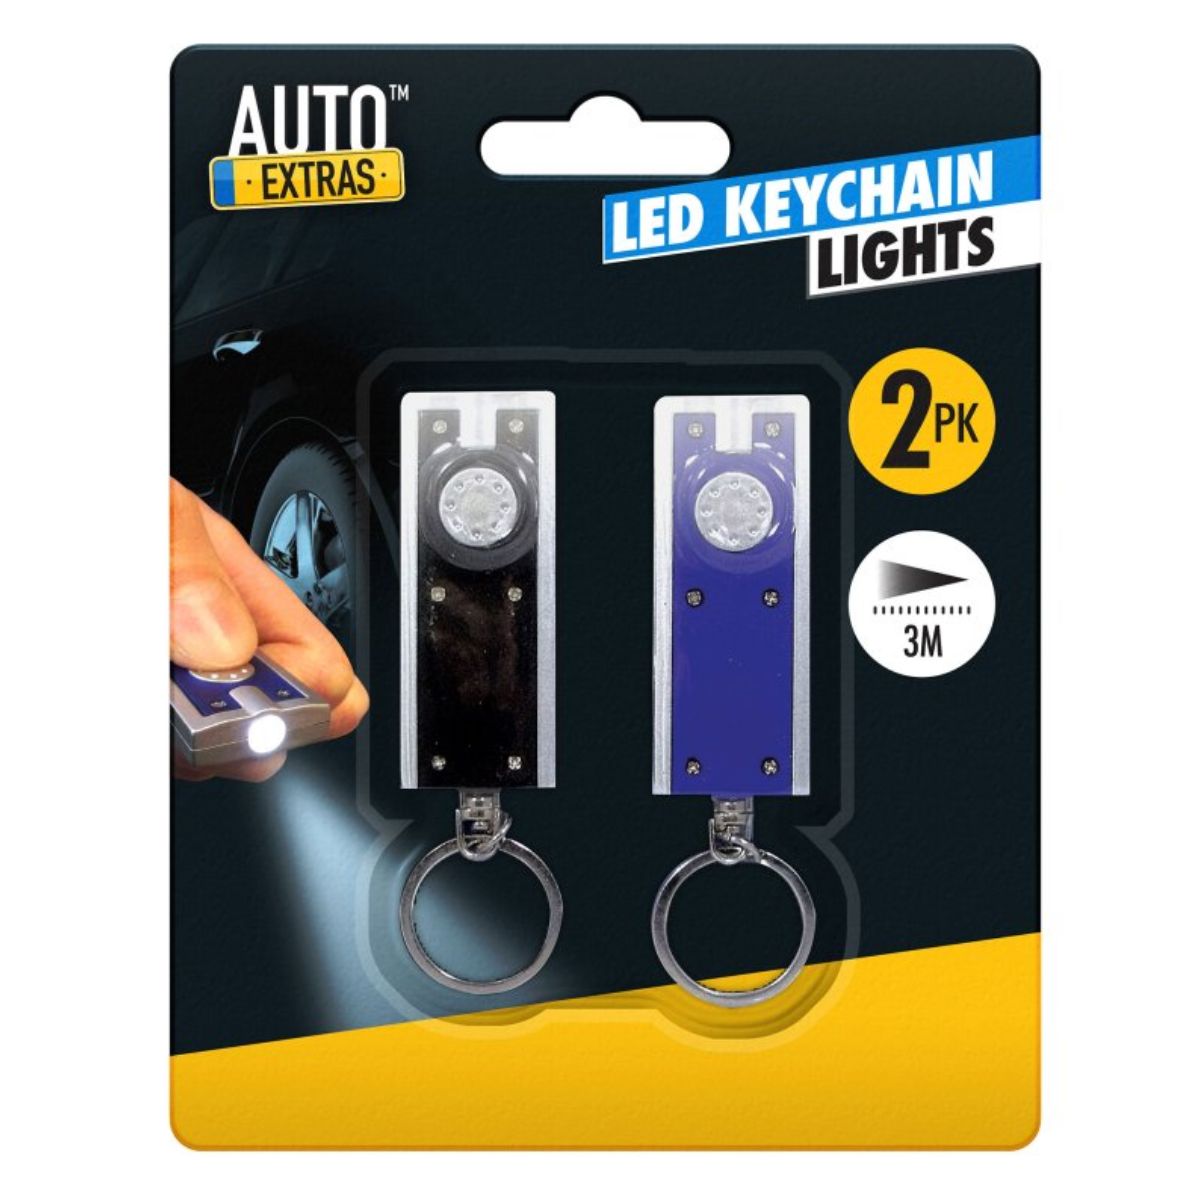 Packaging for a two-pack of Auto Extras - Led Keychain Lights - 2pcs with a 3-meter beam distance claim.